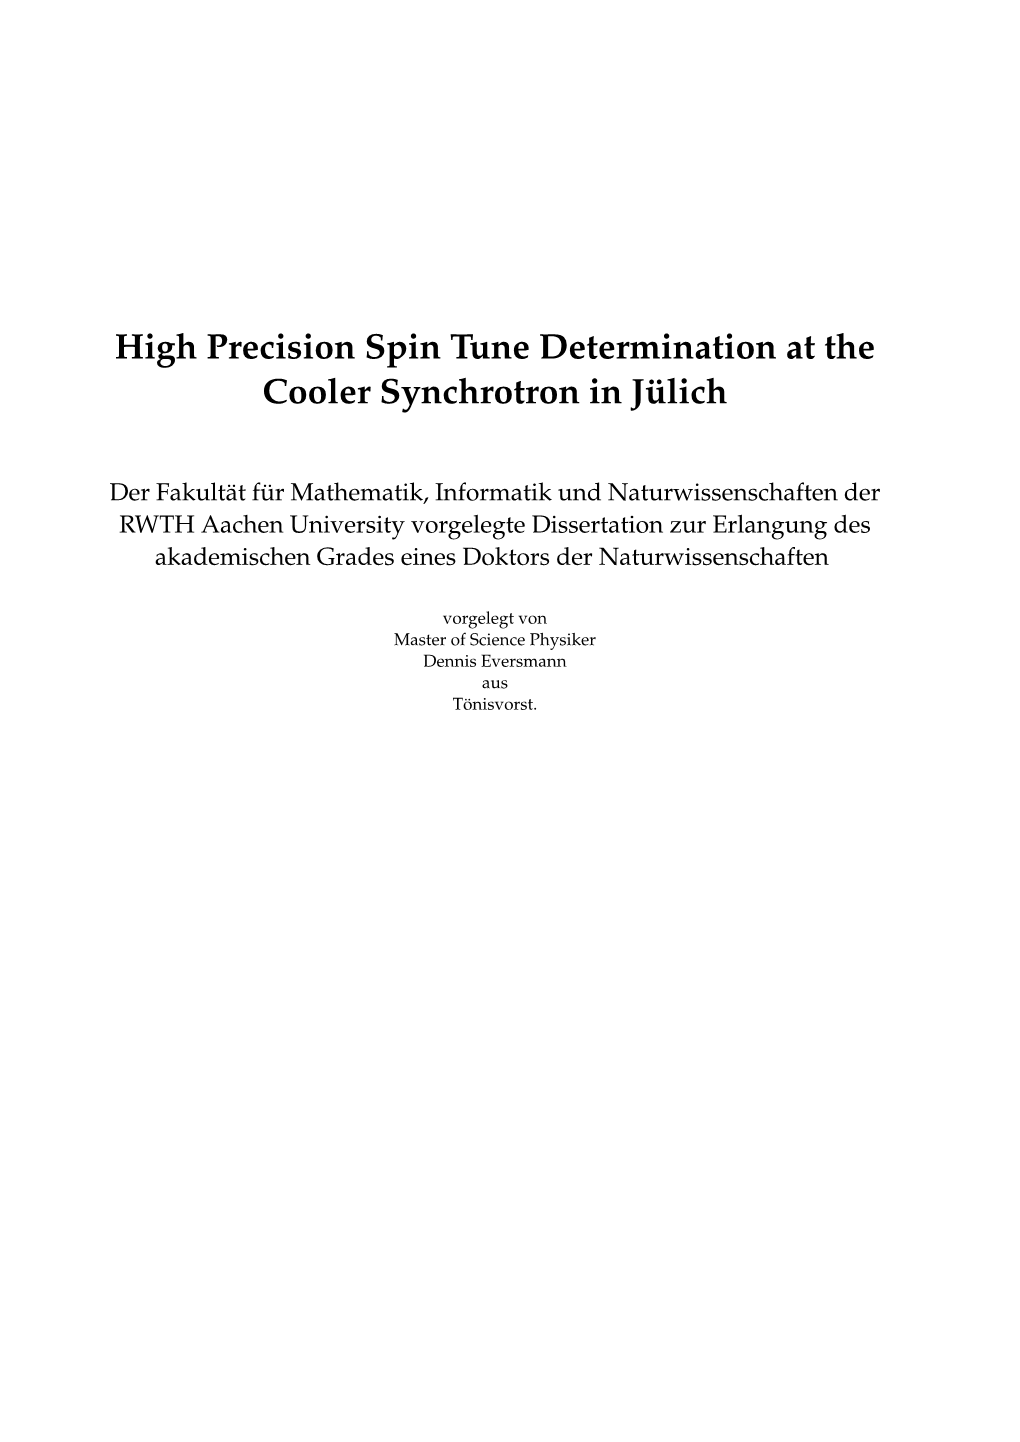 High Precision Spin Tune Determination at the Cooler Synchrotron in Jülich